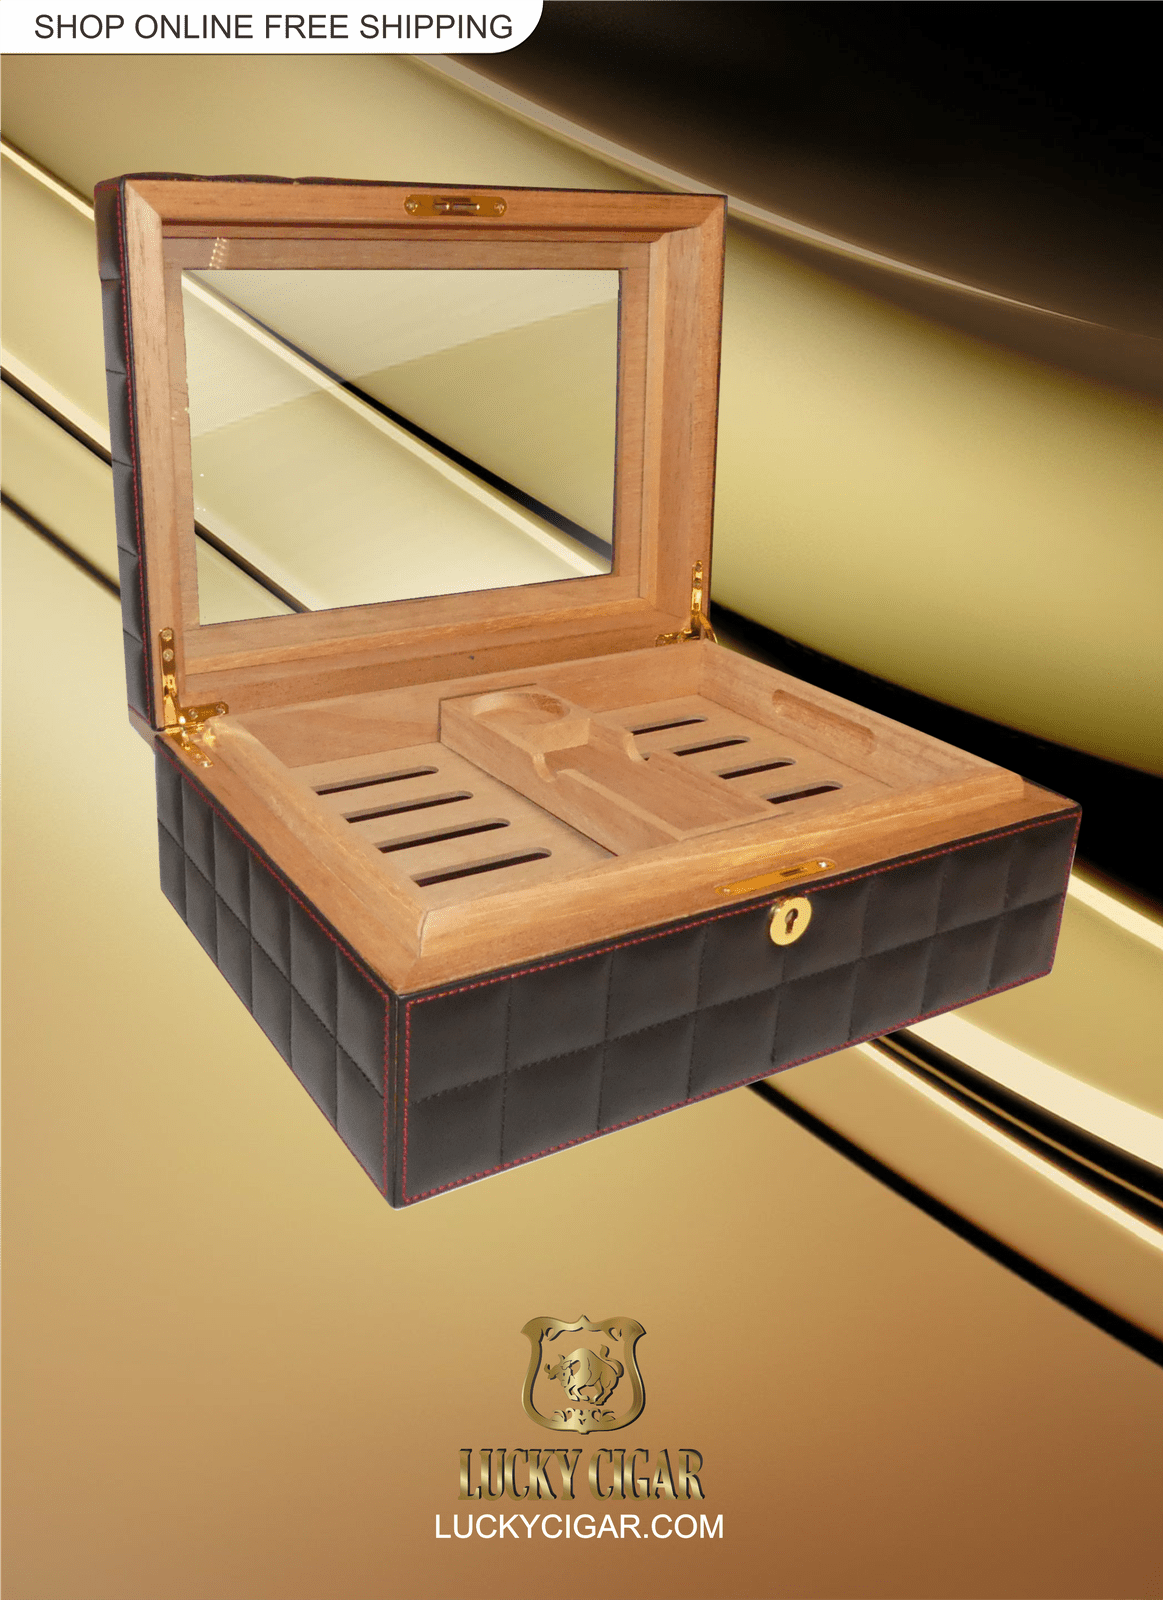 Cigar Lifestyle Accessories: Desk Humidor with Black Block Design and Red, Gold Accents